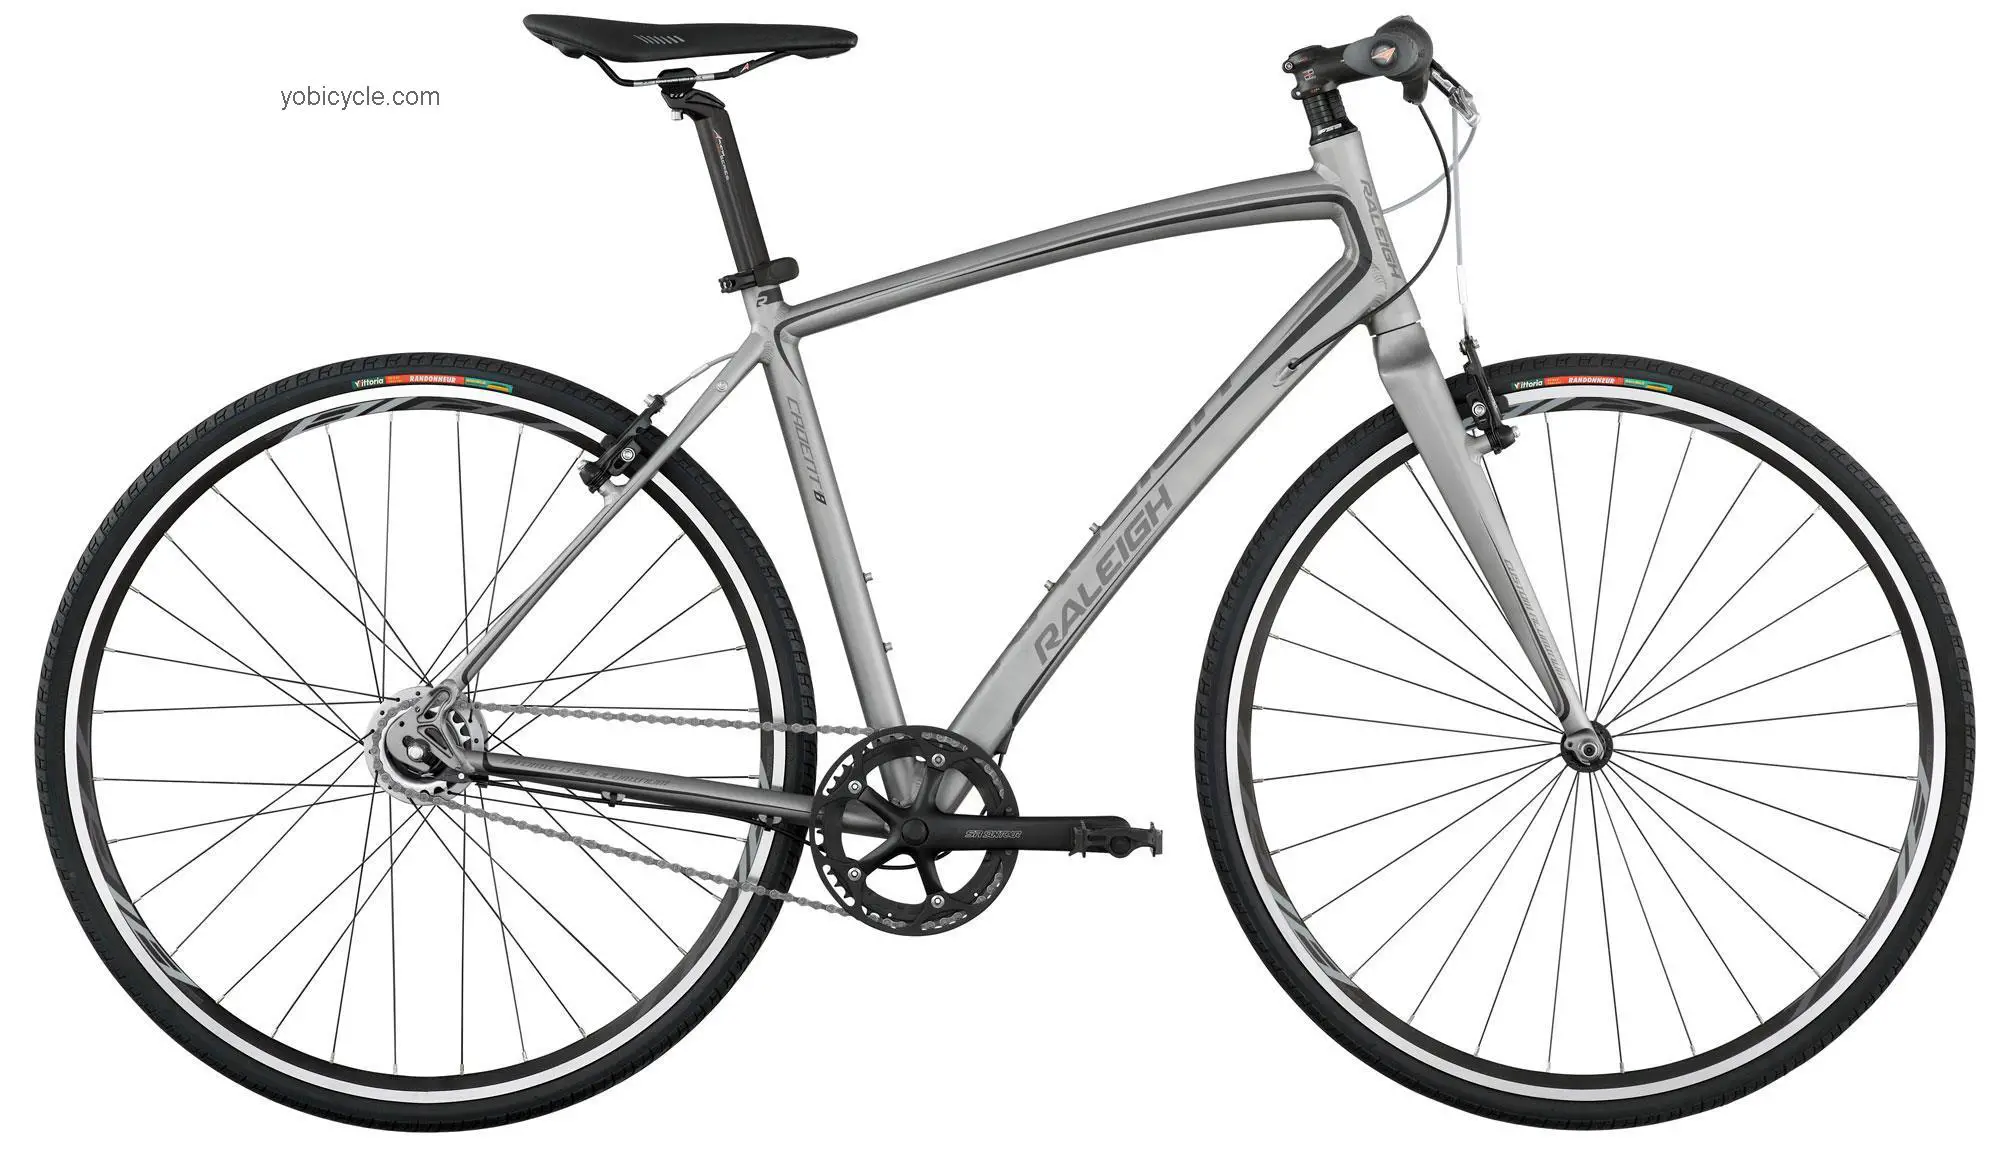 Raleigh Cadent i8 2012 comparison online with competitors